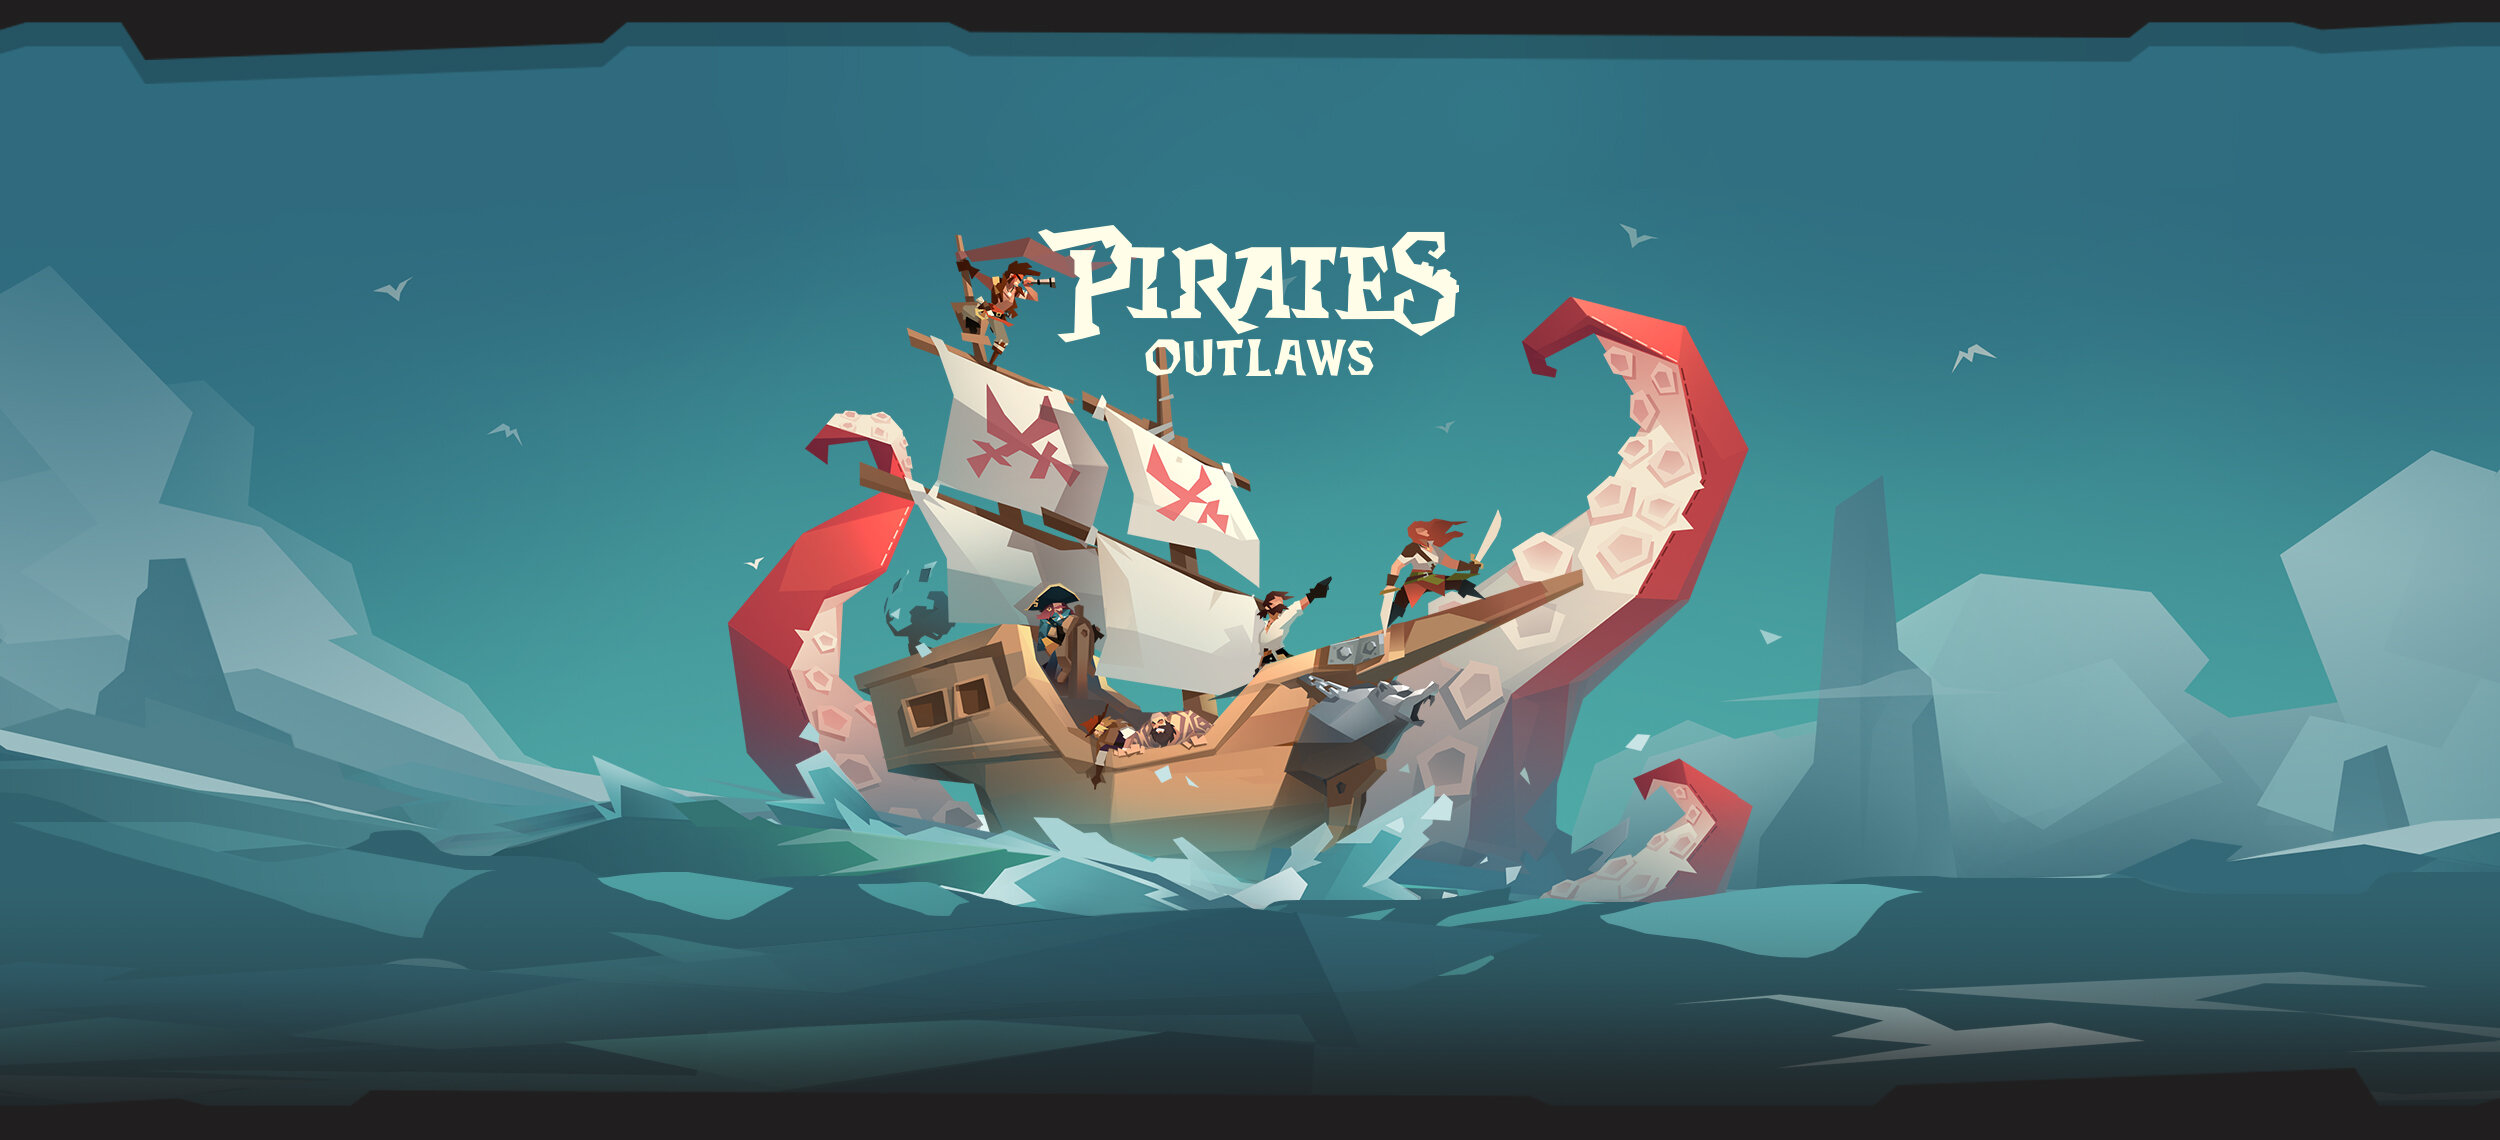 Fabled Game Studio — Pirates Outlaws